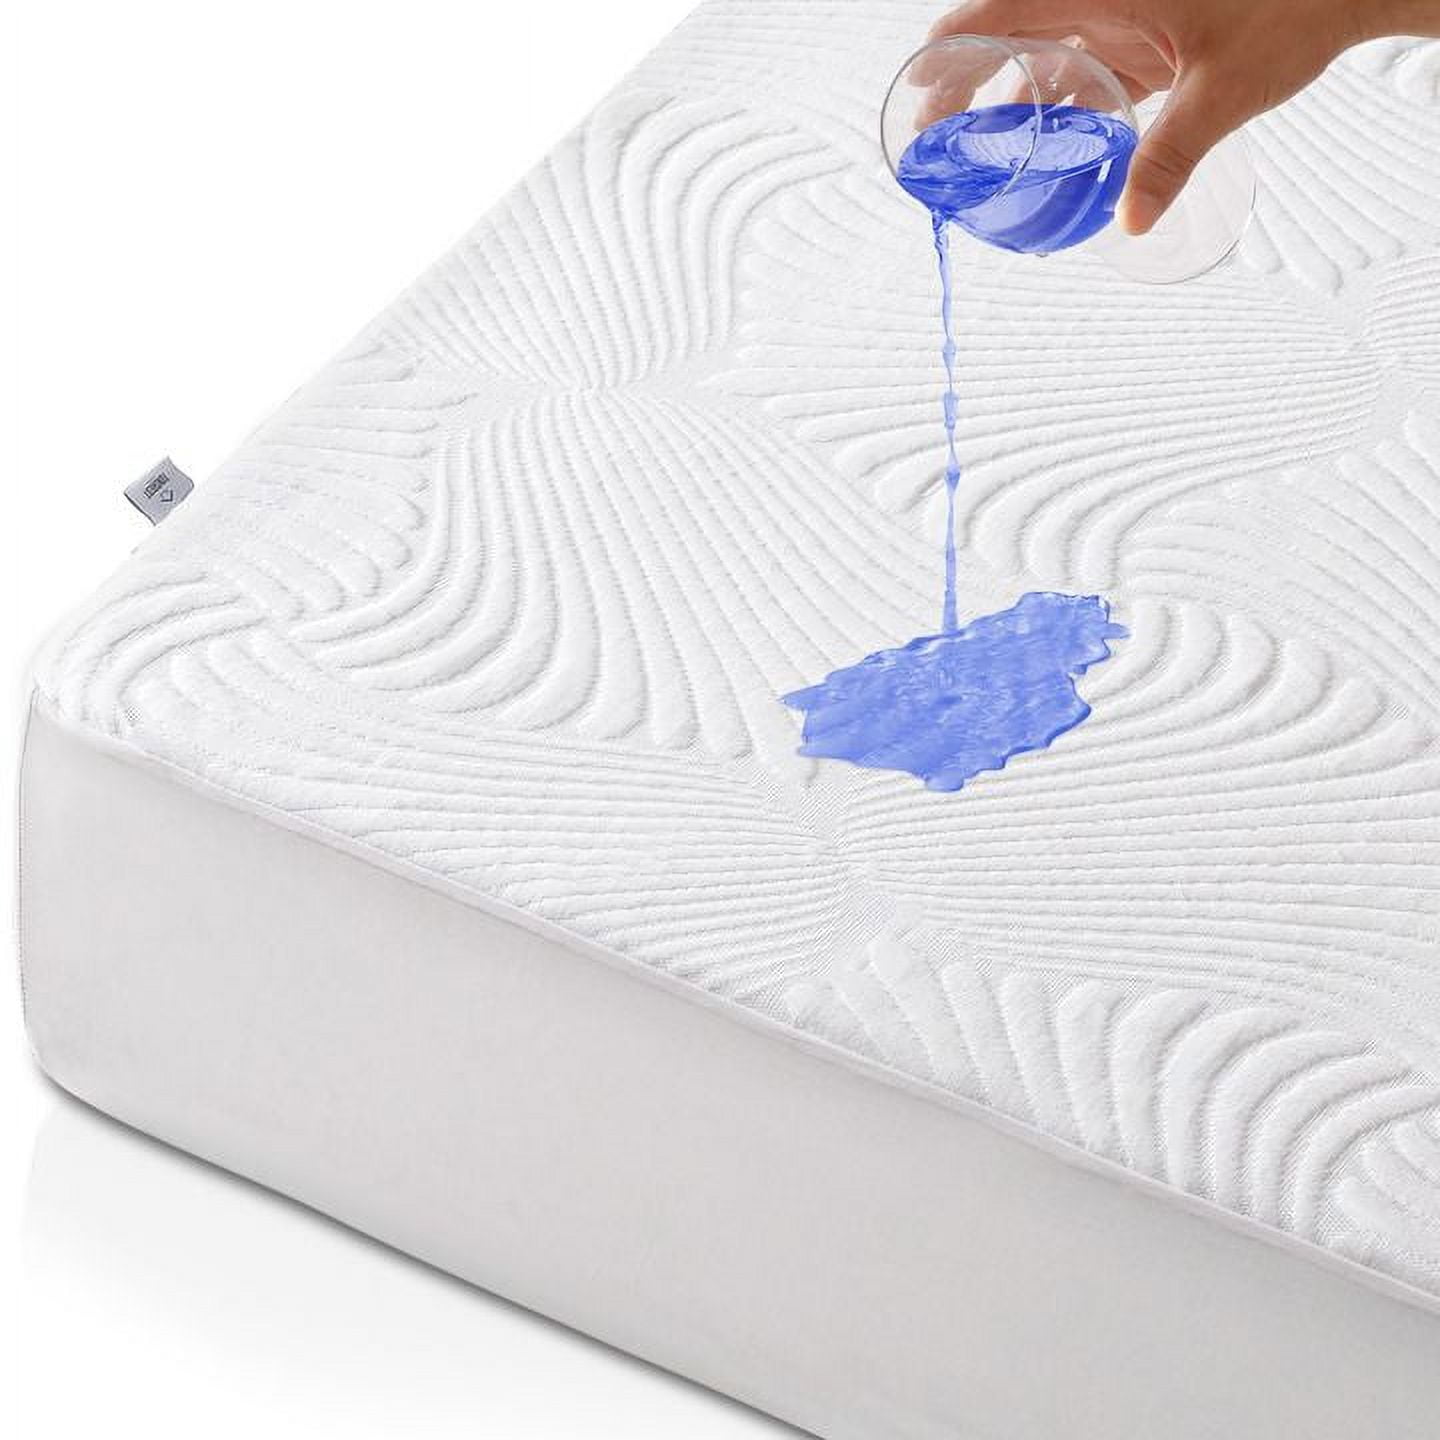 TASTELIFE King Size 100% Waterproof Mattress Protector Cotton Terry  Mattress Cover, Fitted 8-21 Deep Pocket Bed Mattress Pad Cover Vinyl-Free